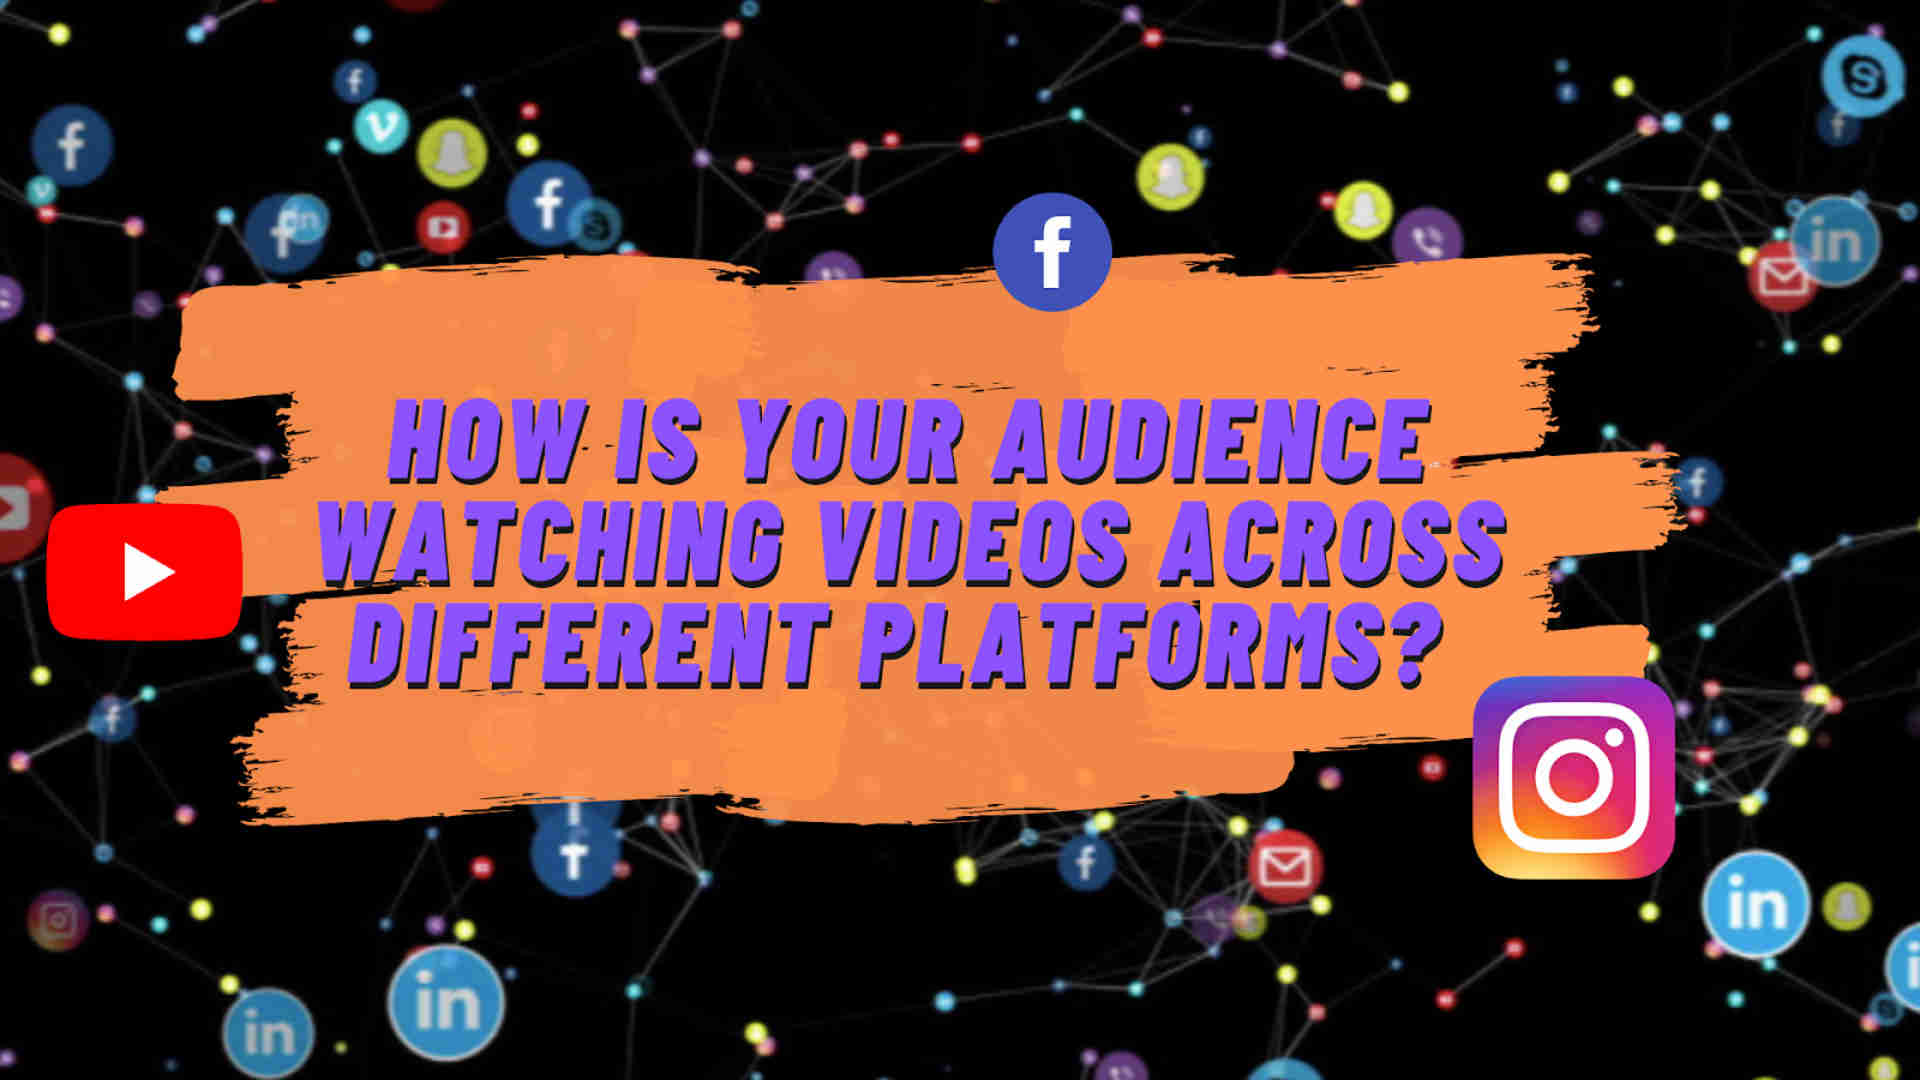 How is your audience watching videos across different platforms?